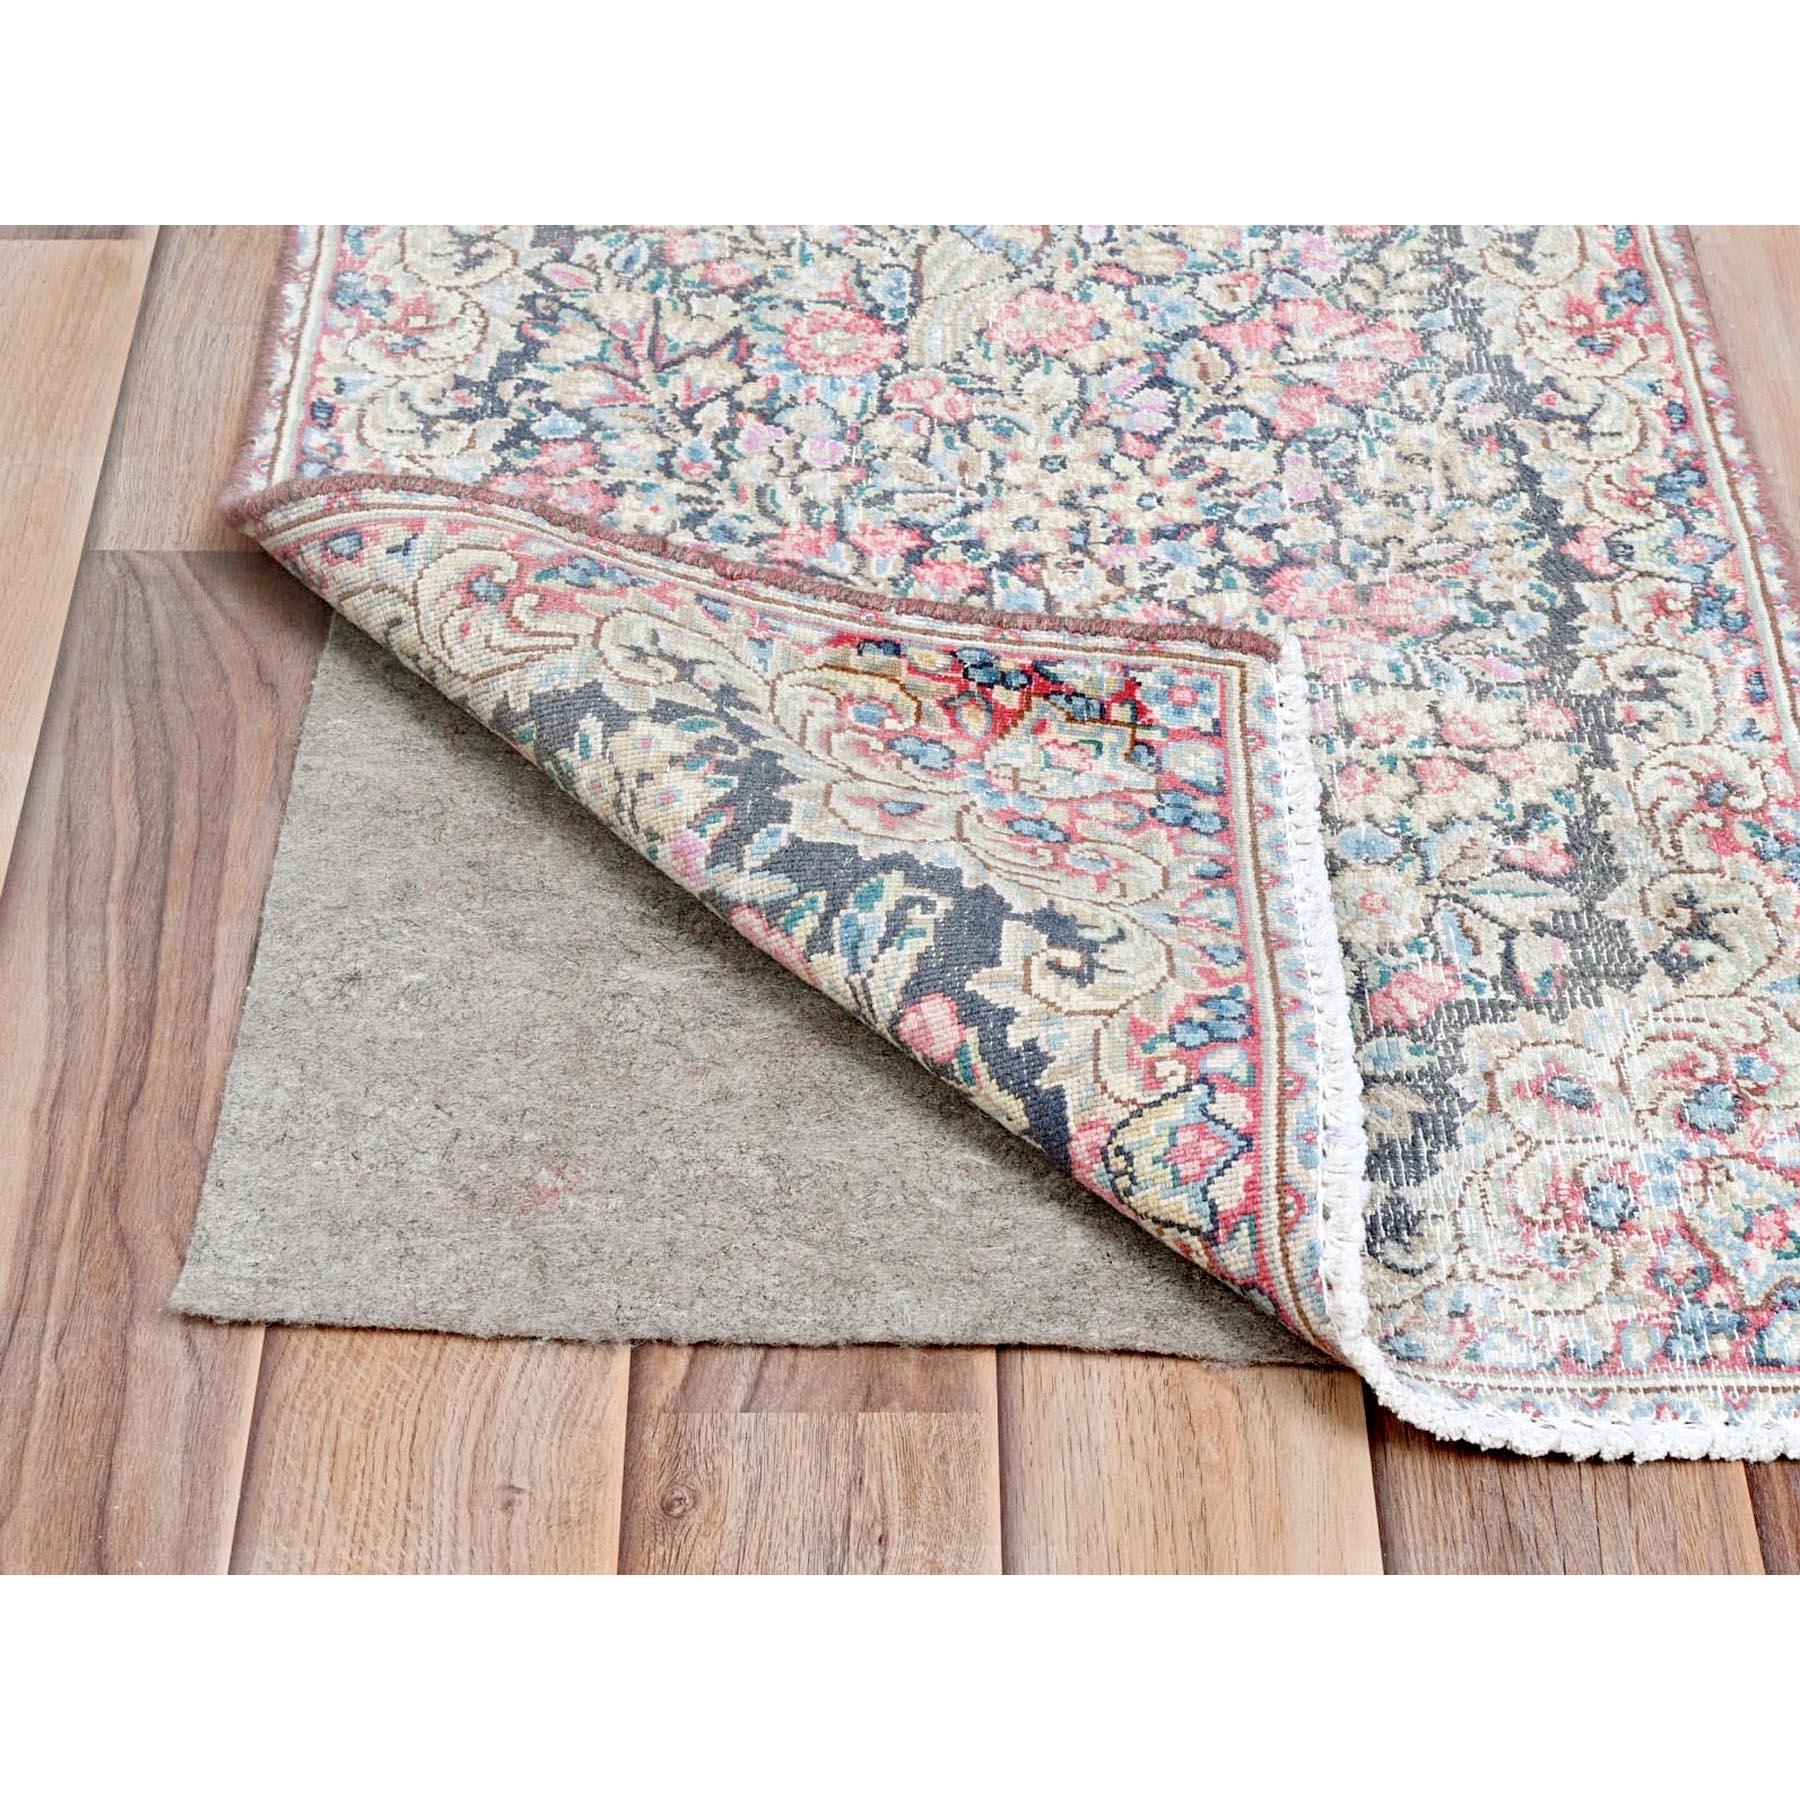 Medieval Colorful Worn Wool Hand Knotted Old Persian Kerman Distressed Look Rug For Sale